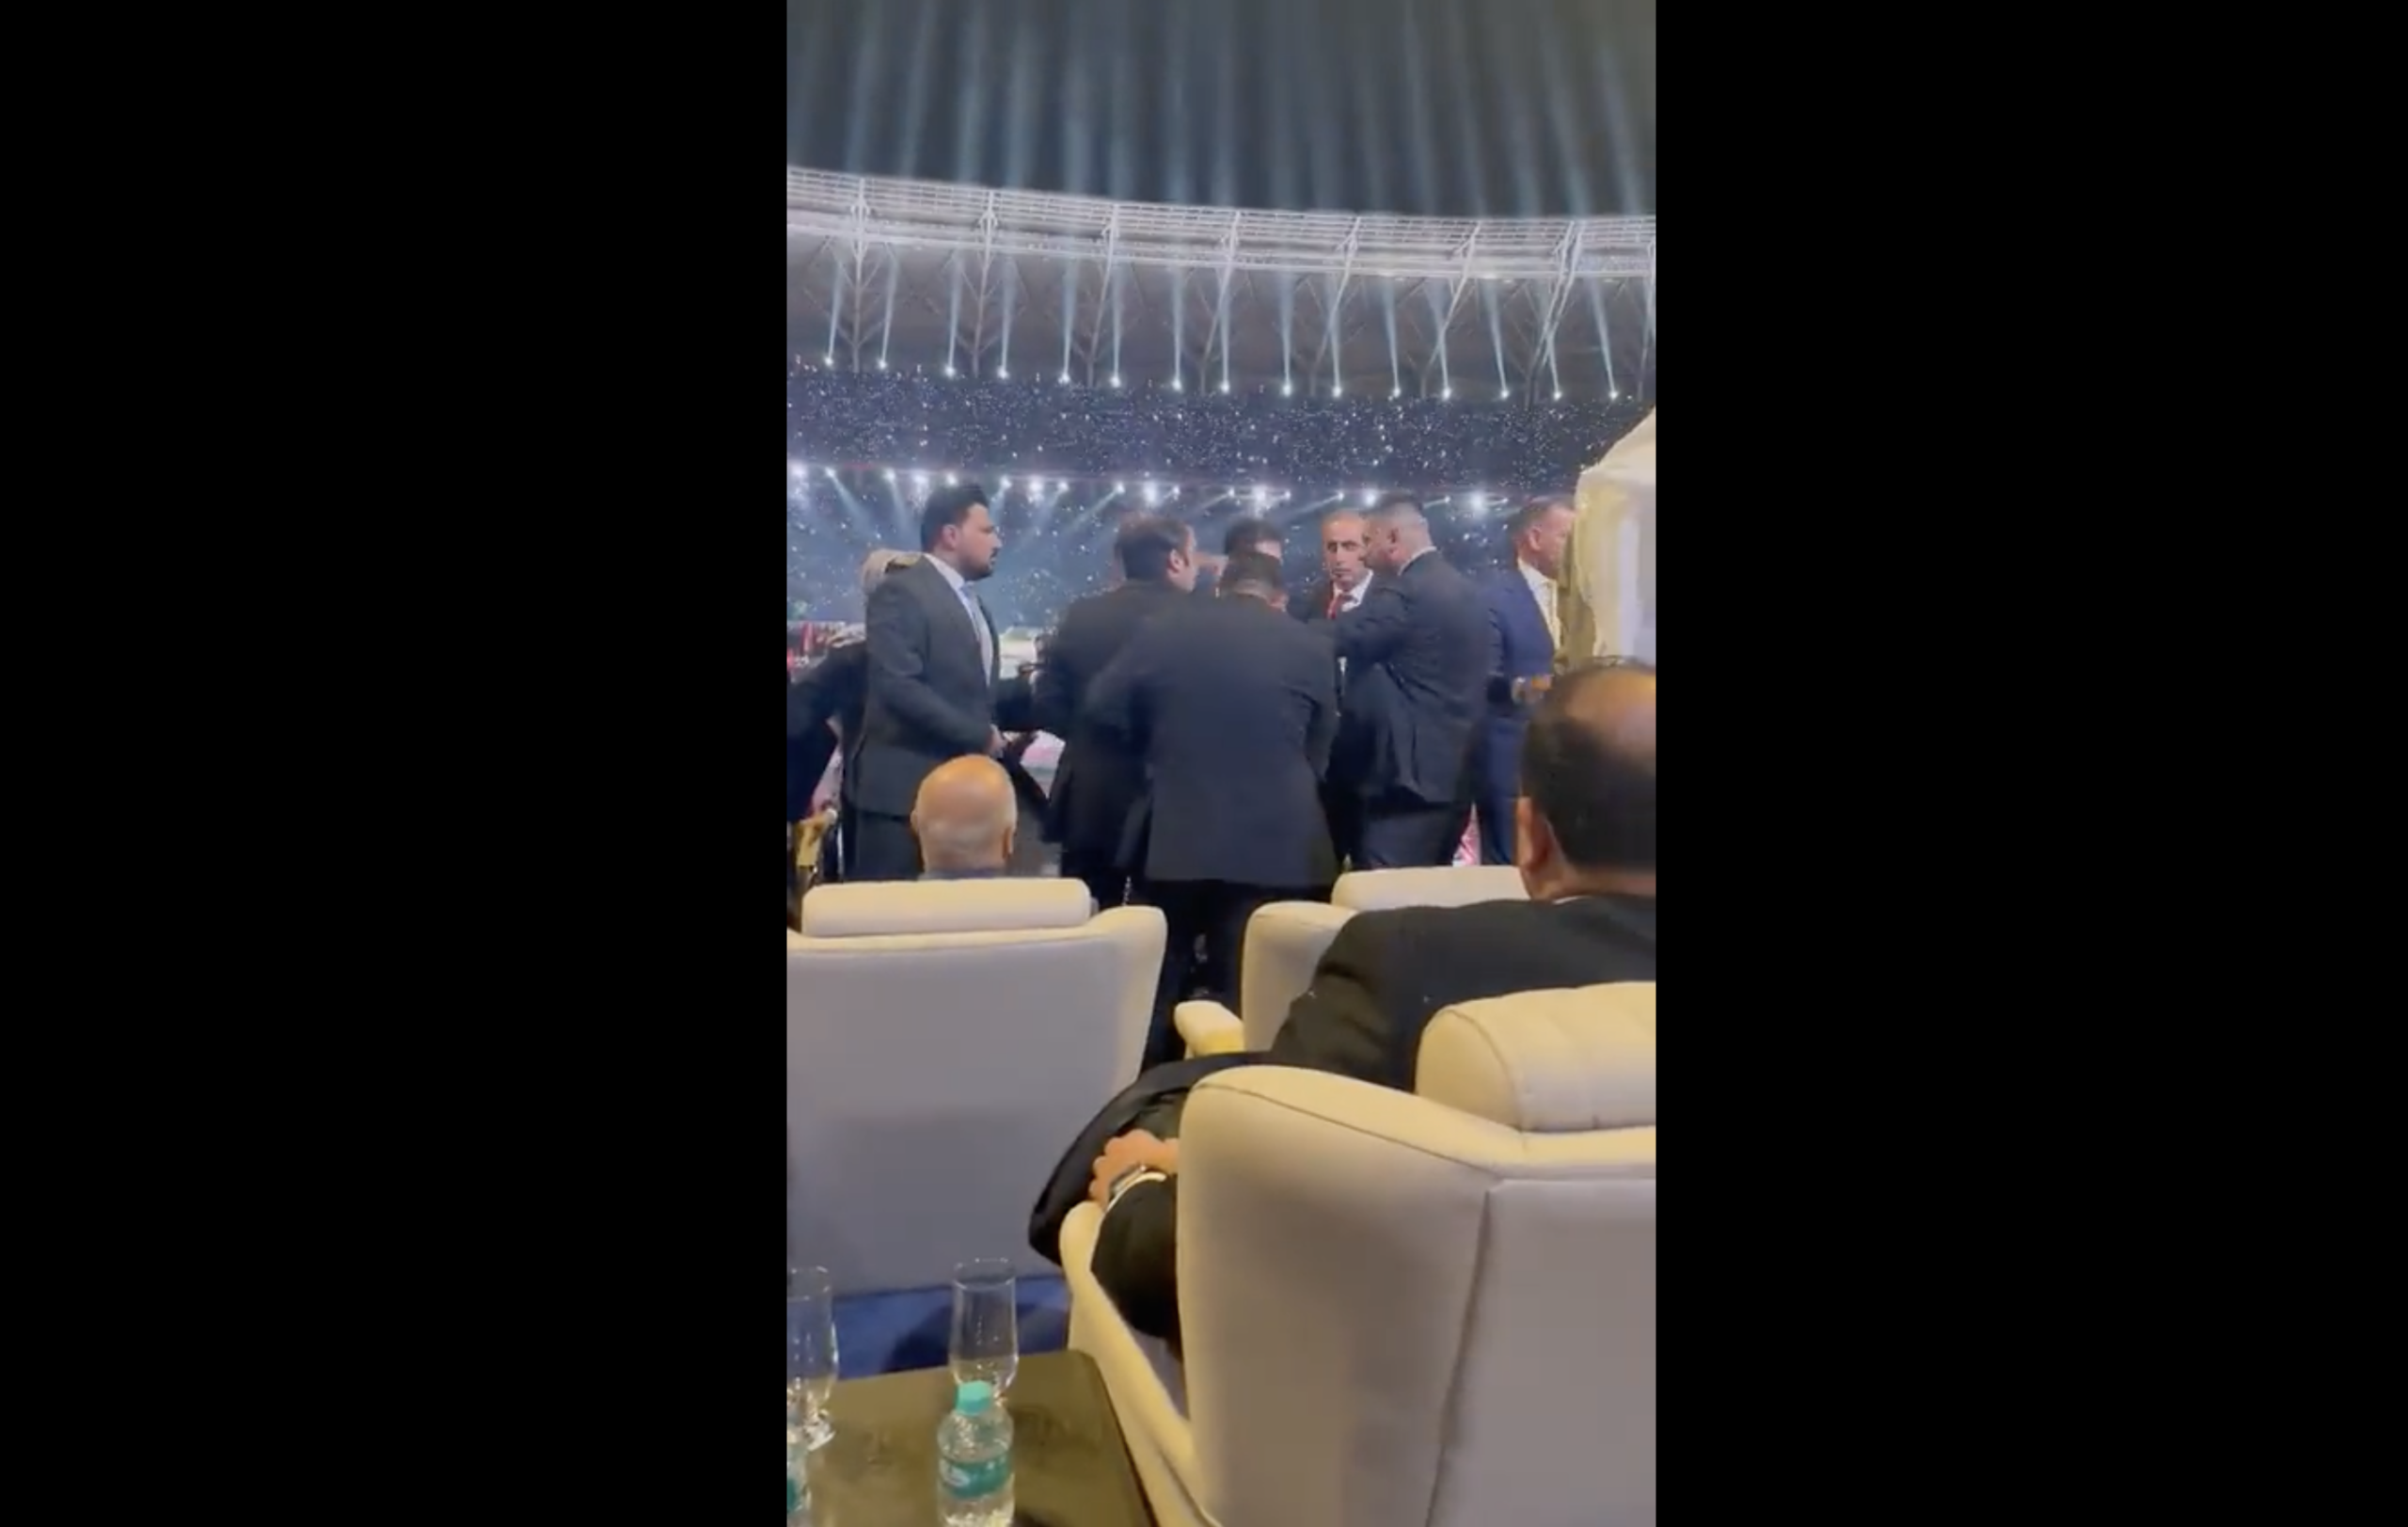 Kuwait’s delegation to the Arabian Gulf Cup games in Iraq was forced to leave the stadium due to a brawl that broke out ahead of the opening ceremony [@gorgeous4ew/Twitter]